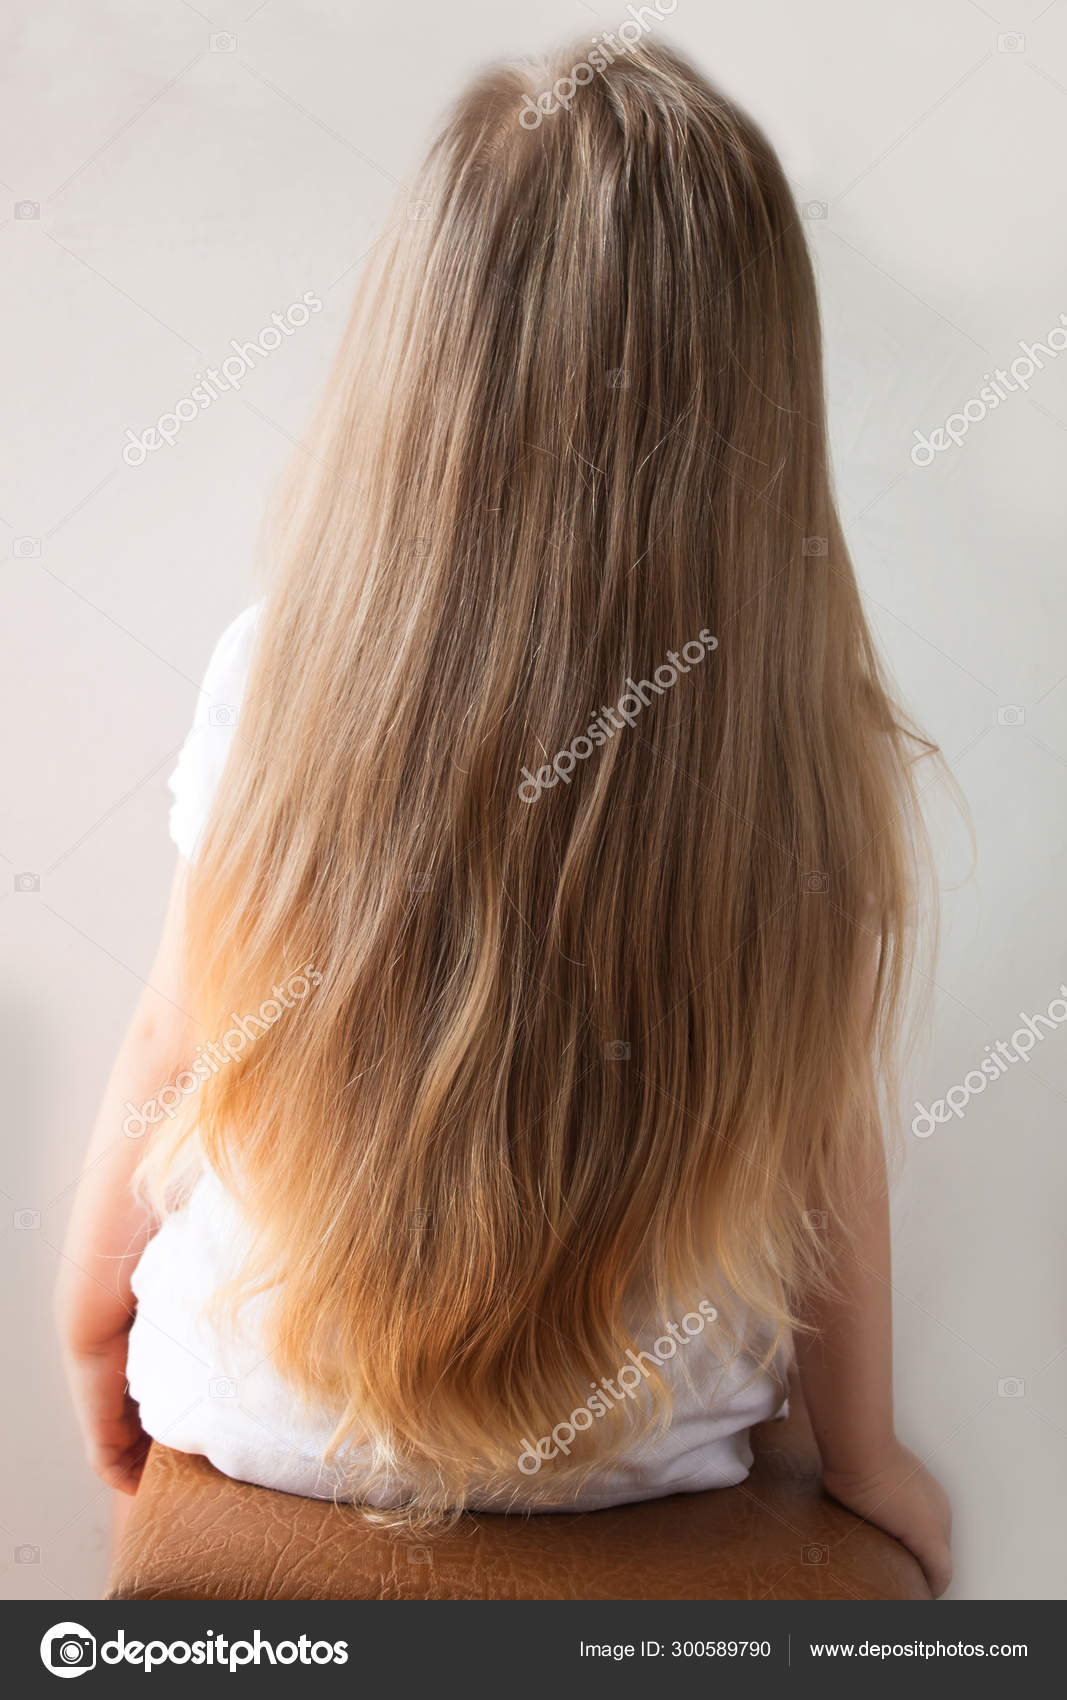 Cute Girl With Long Blond Hair Back View Of Little Girlie